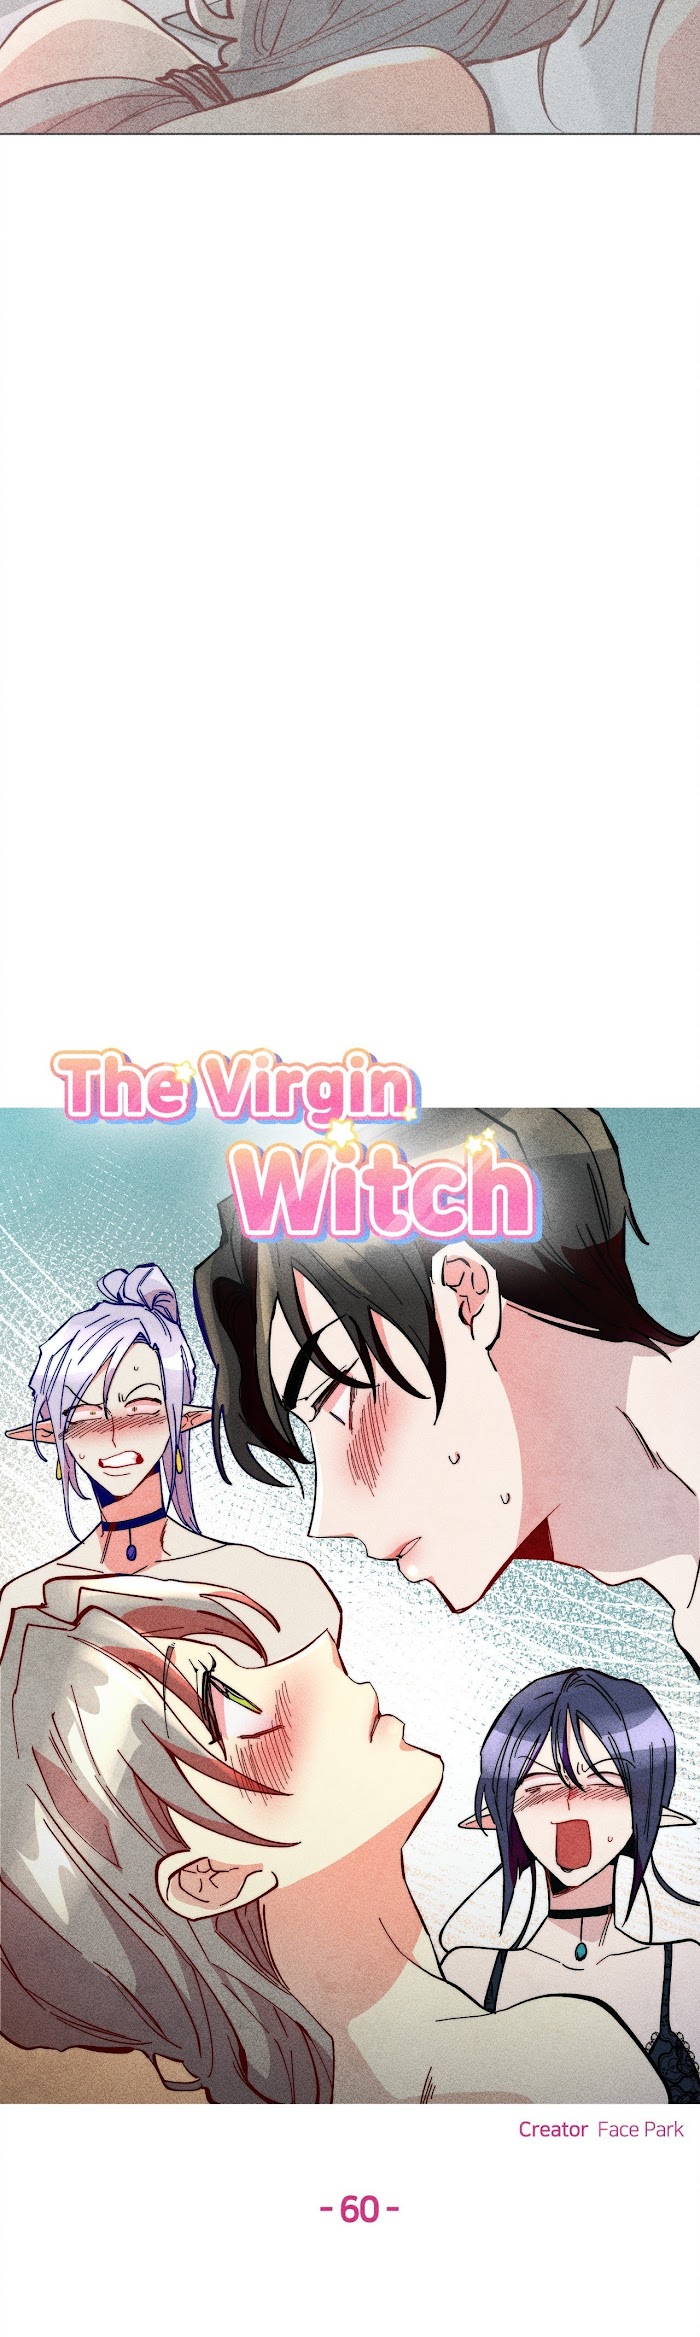 The Virgin Witch - Page 2